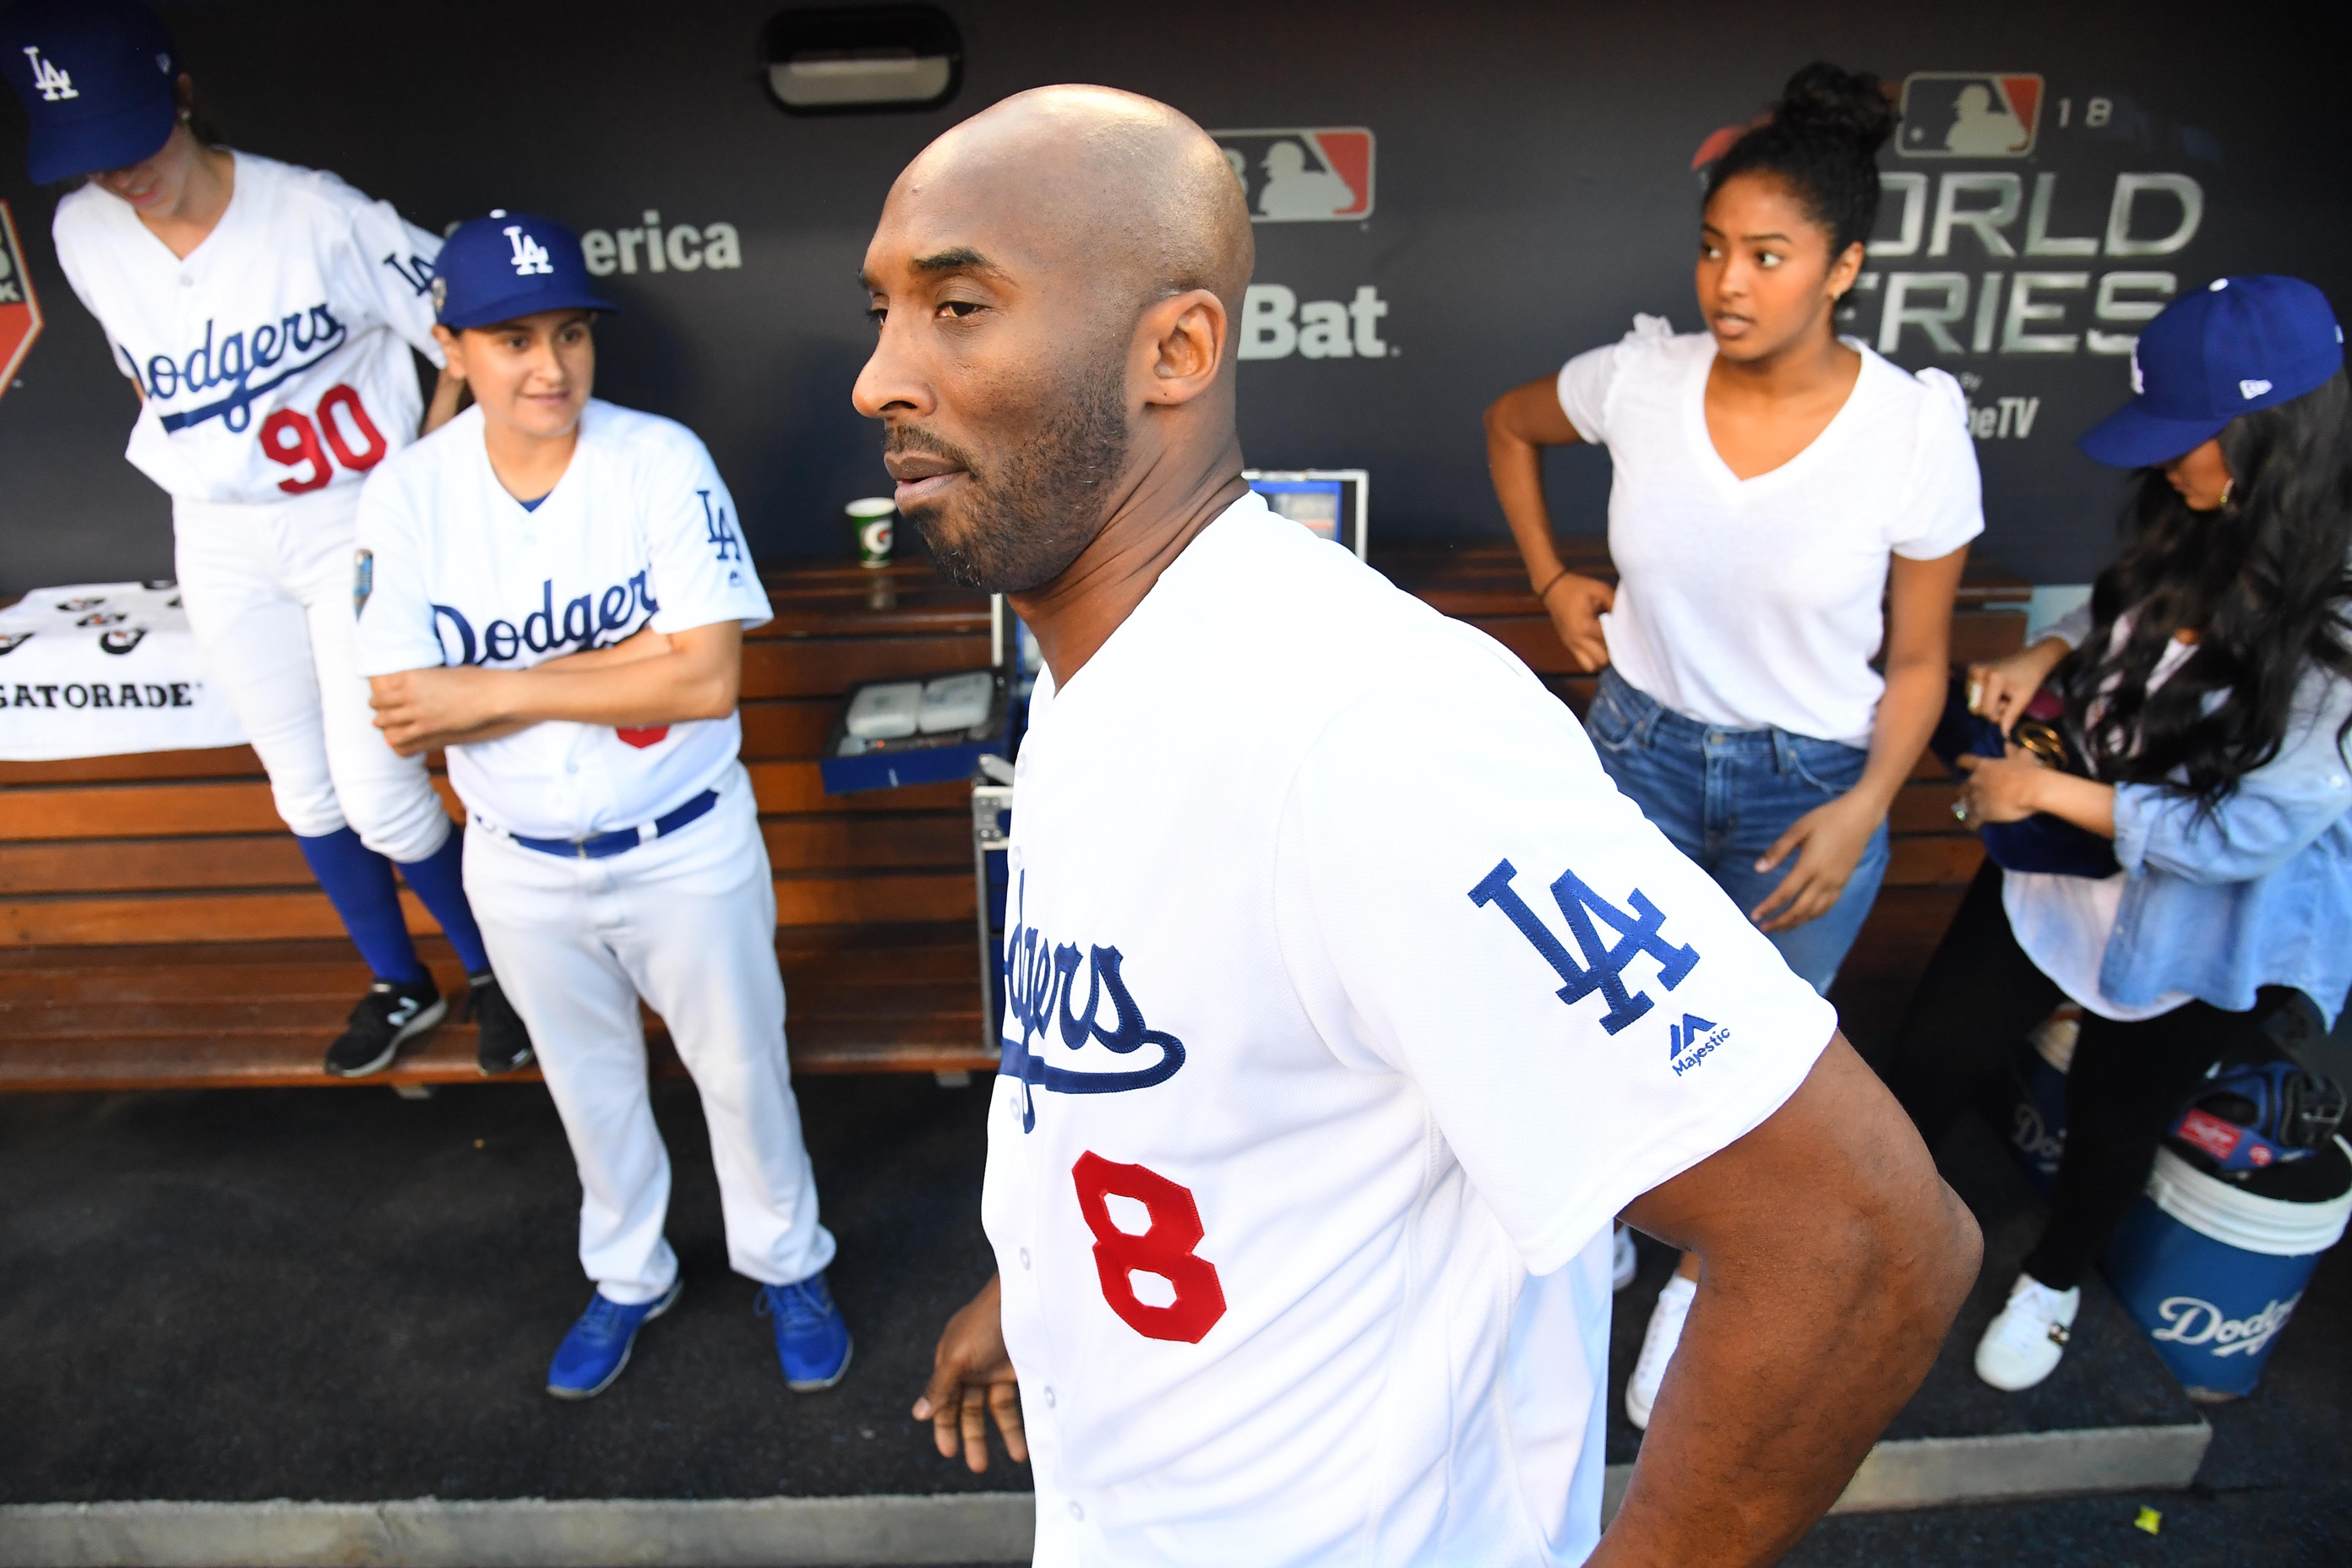 Score a Special Edition Kobe Bryant LA Dodgers Jersey At Lakers Night  September 1st - Sneaker News